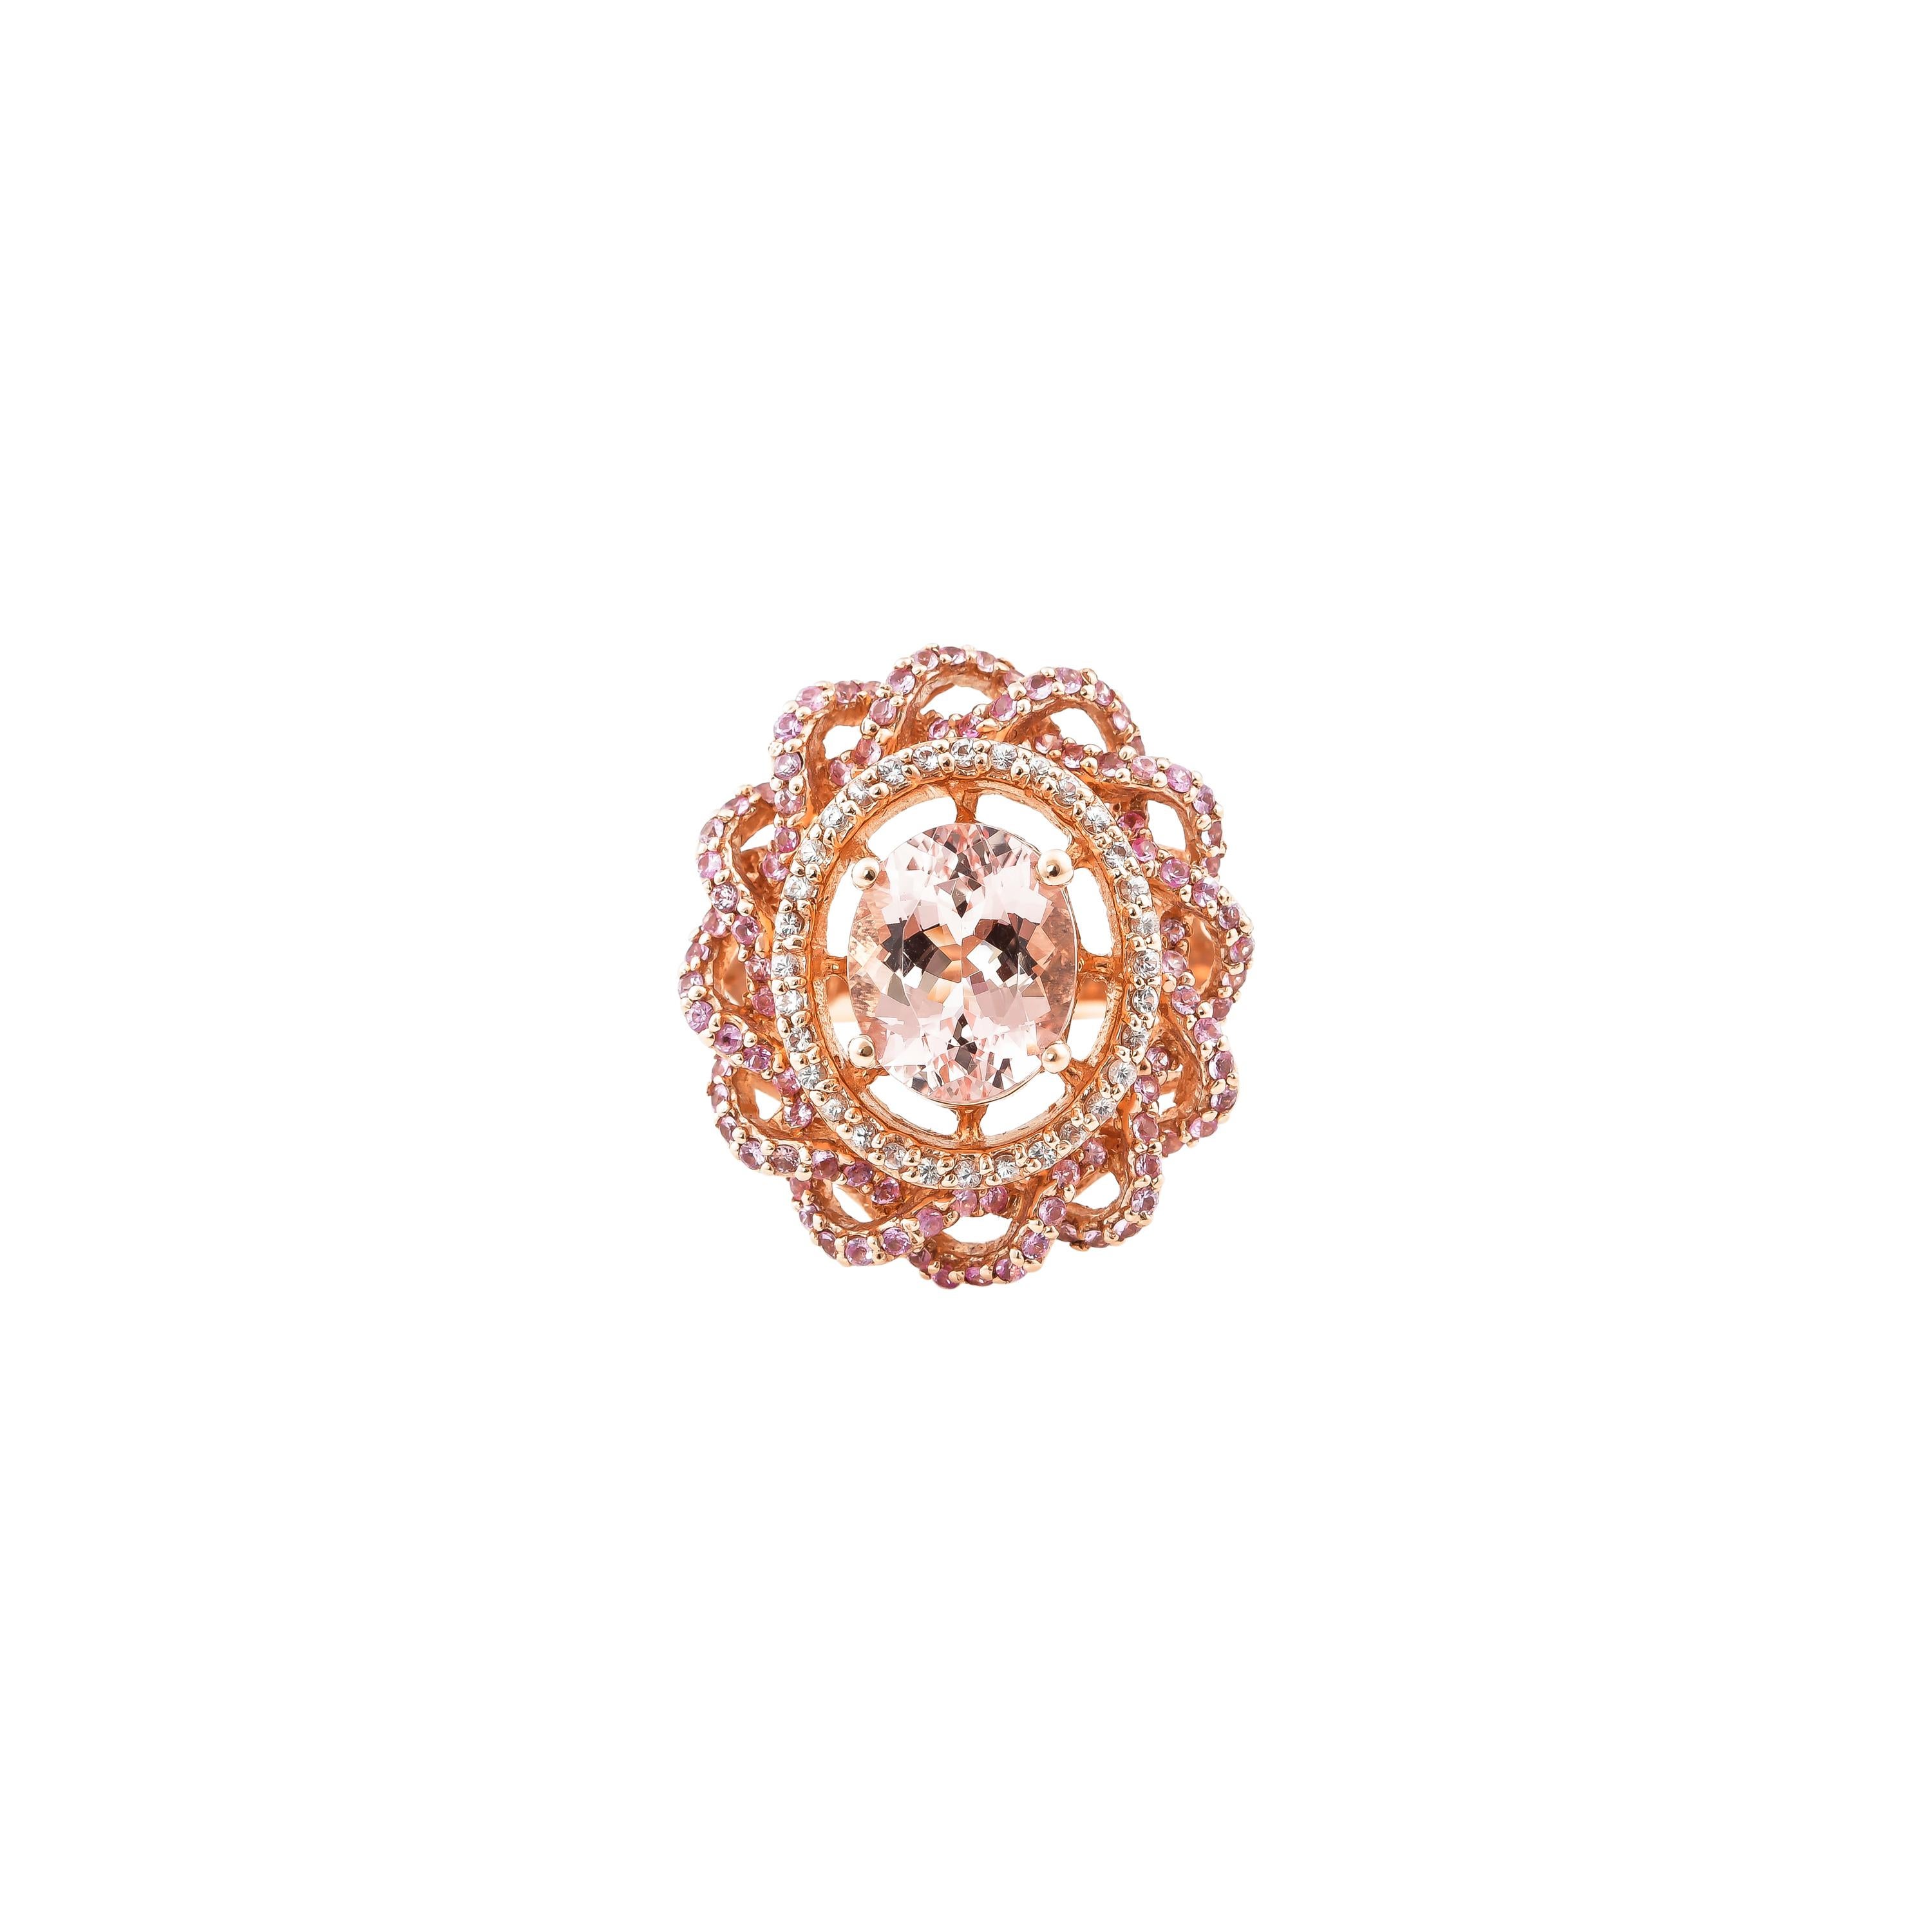 Oval Cut 3.1 Carat Morganite and Diamond Ring in 18 Karat Rose Gold For Sale